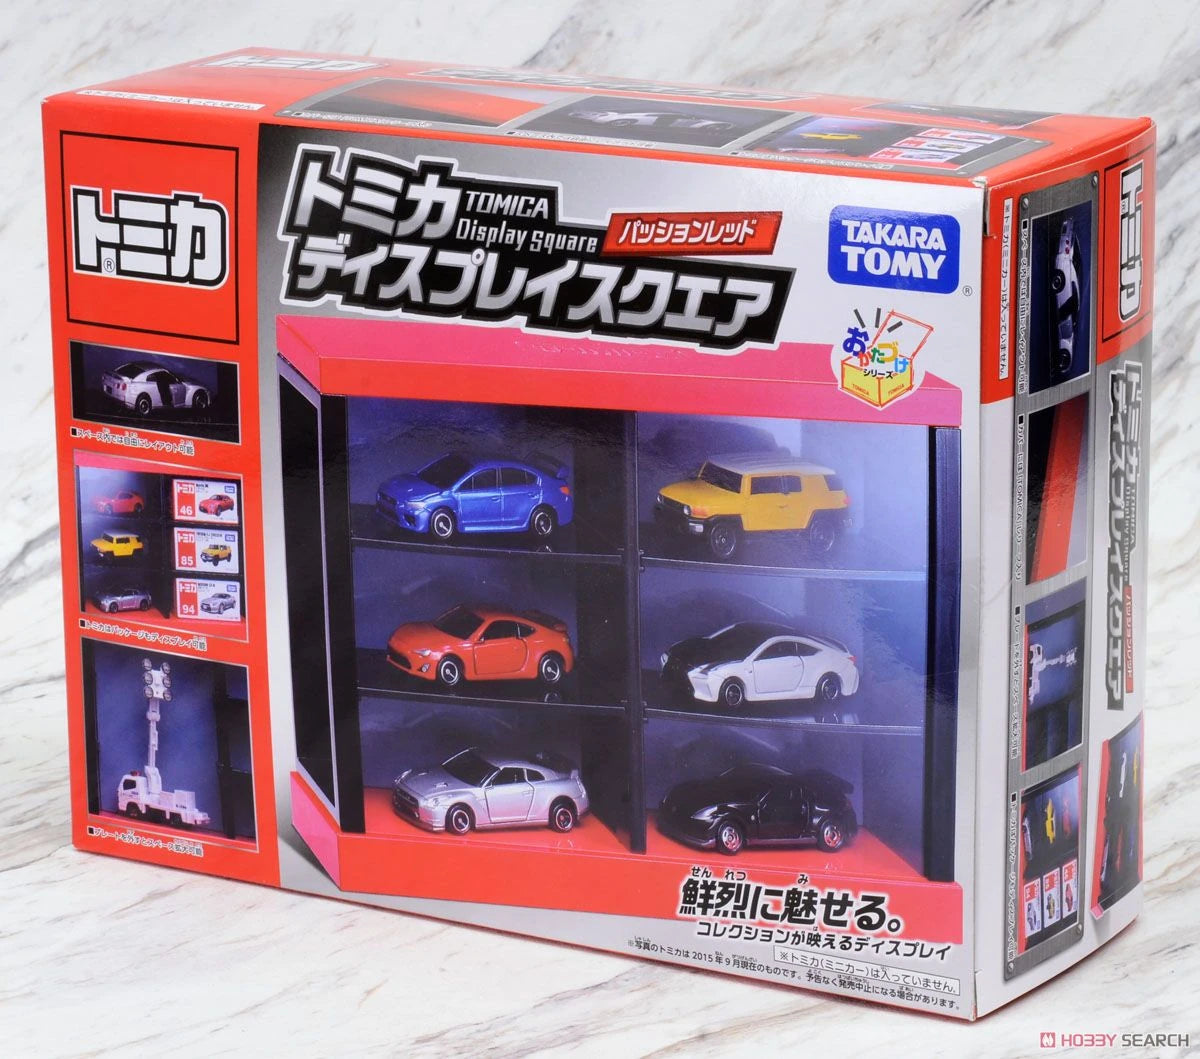 Takaratomy Tomica Display Square Passion Red Display case